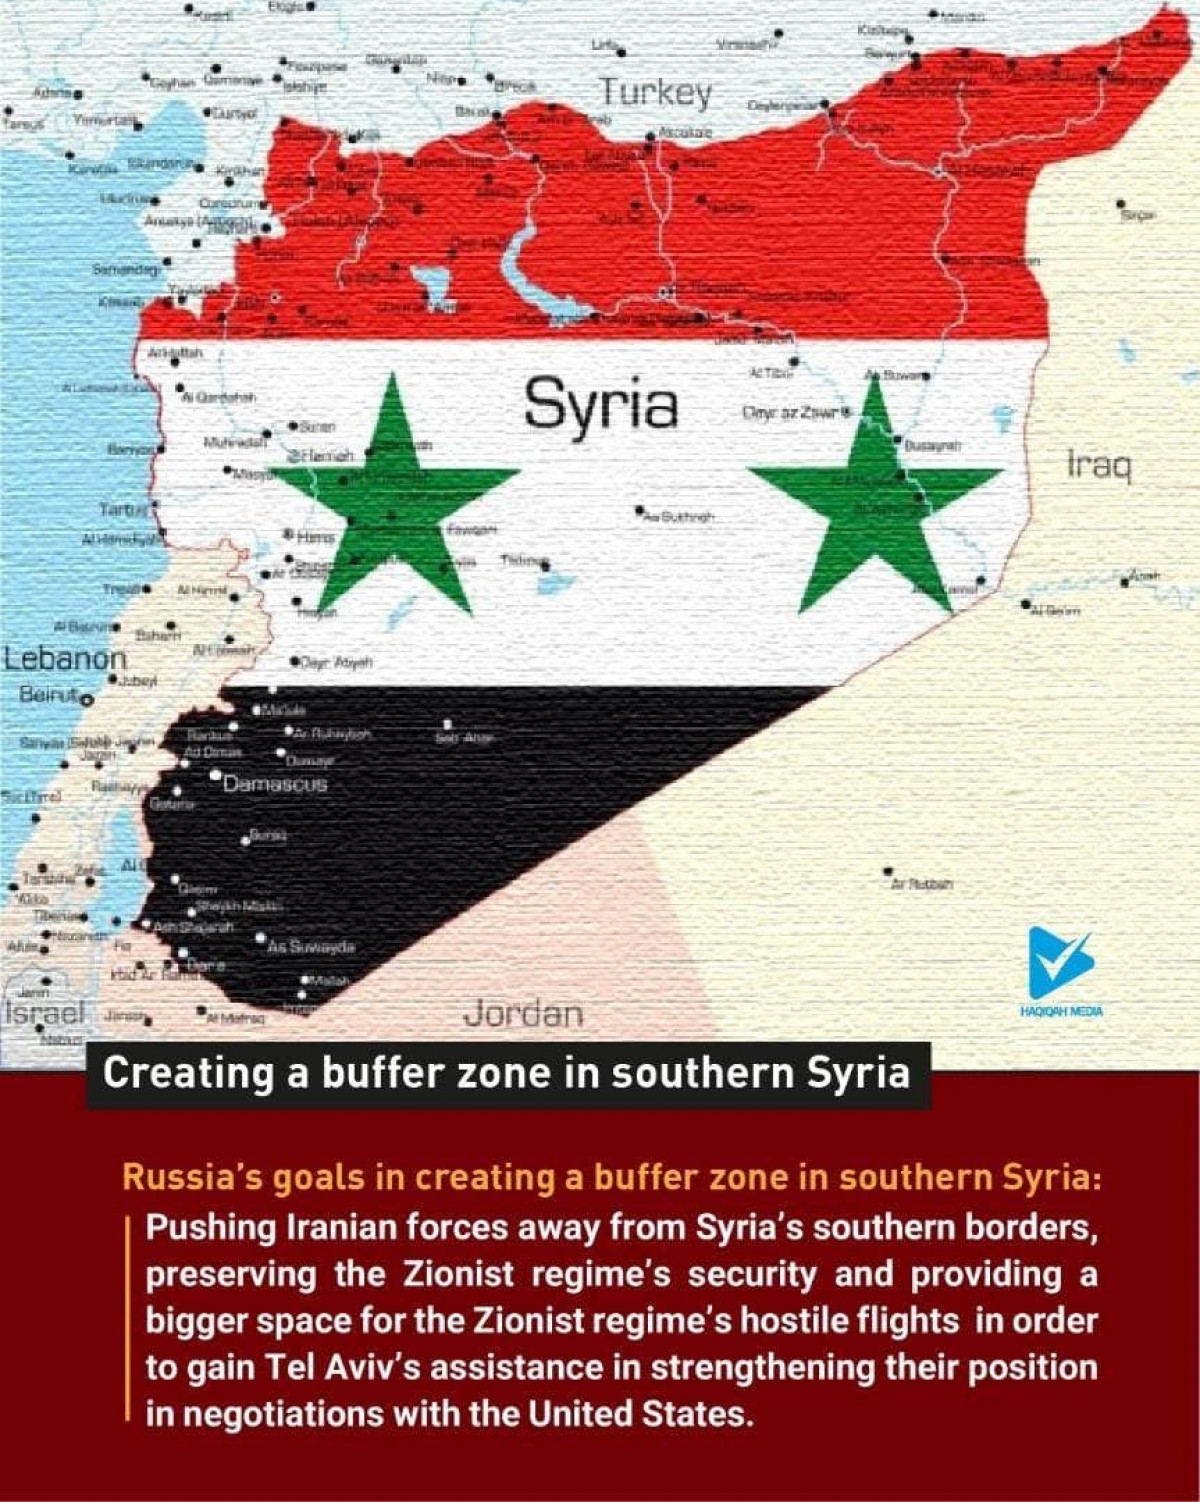 Russia’s goals in creating a buffer zone in southern Syria: